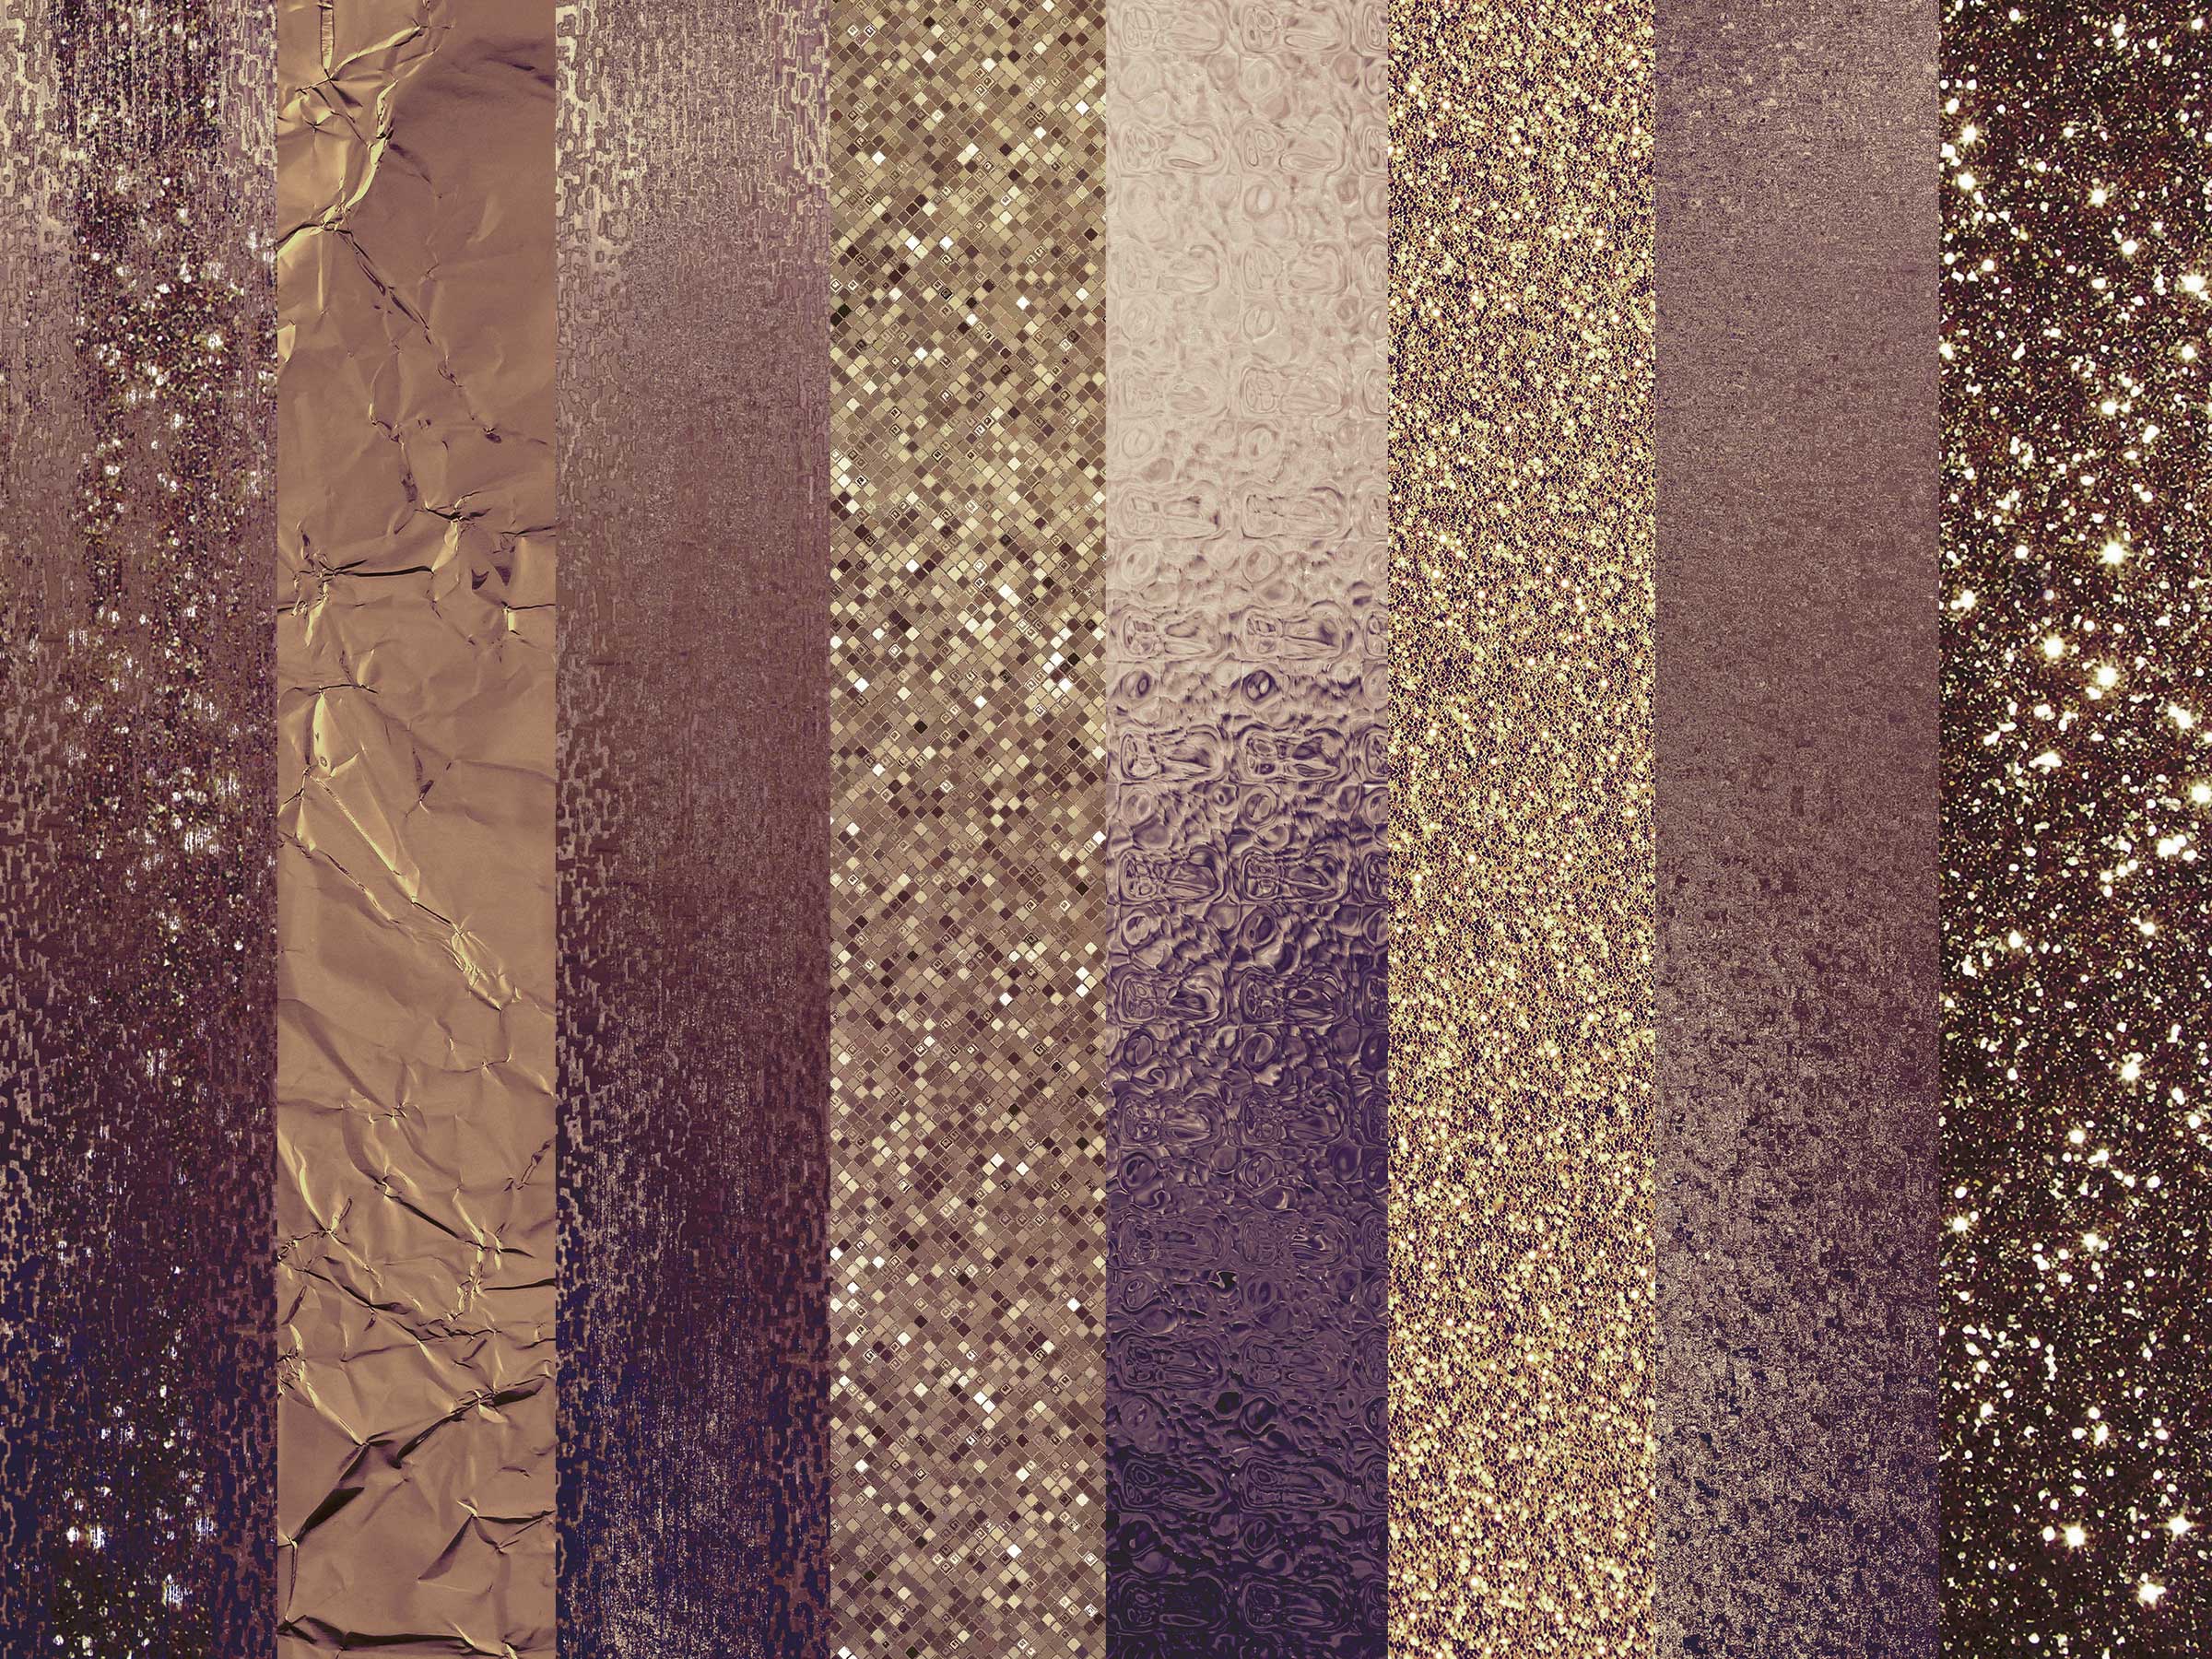 Bronze Foil and Glitter Textures